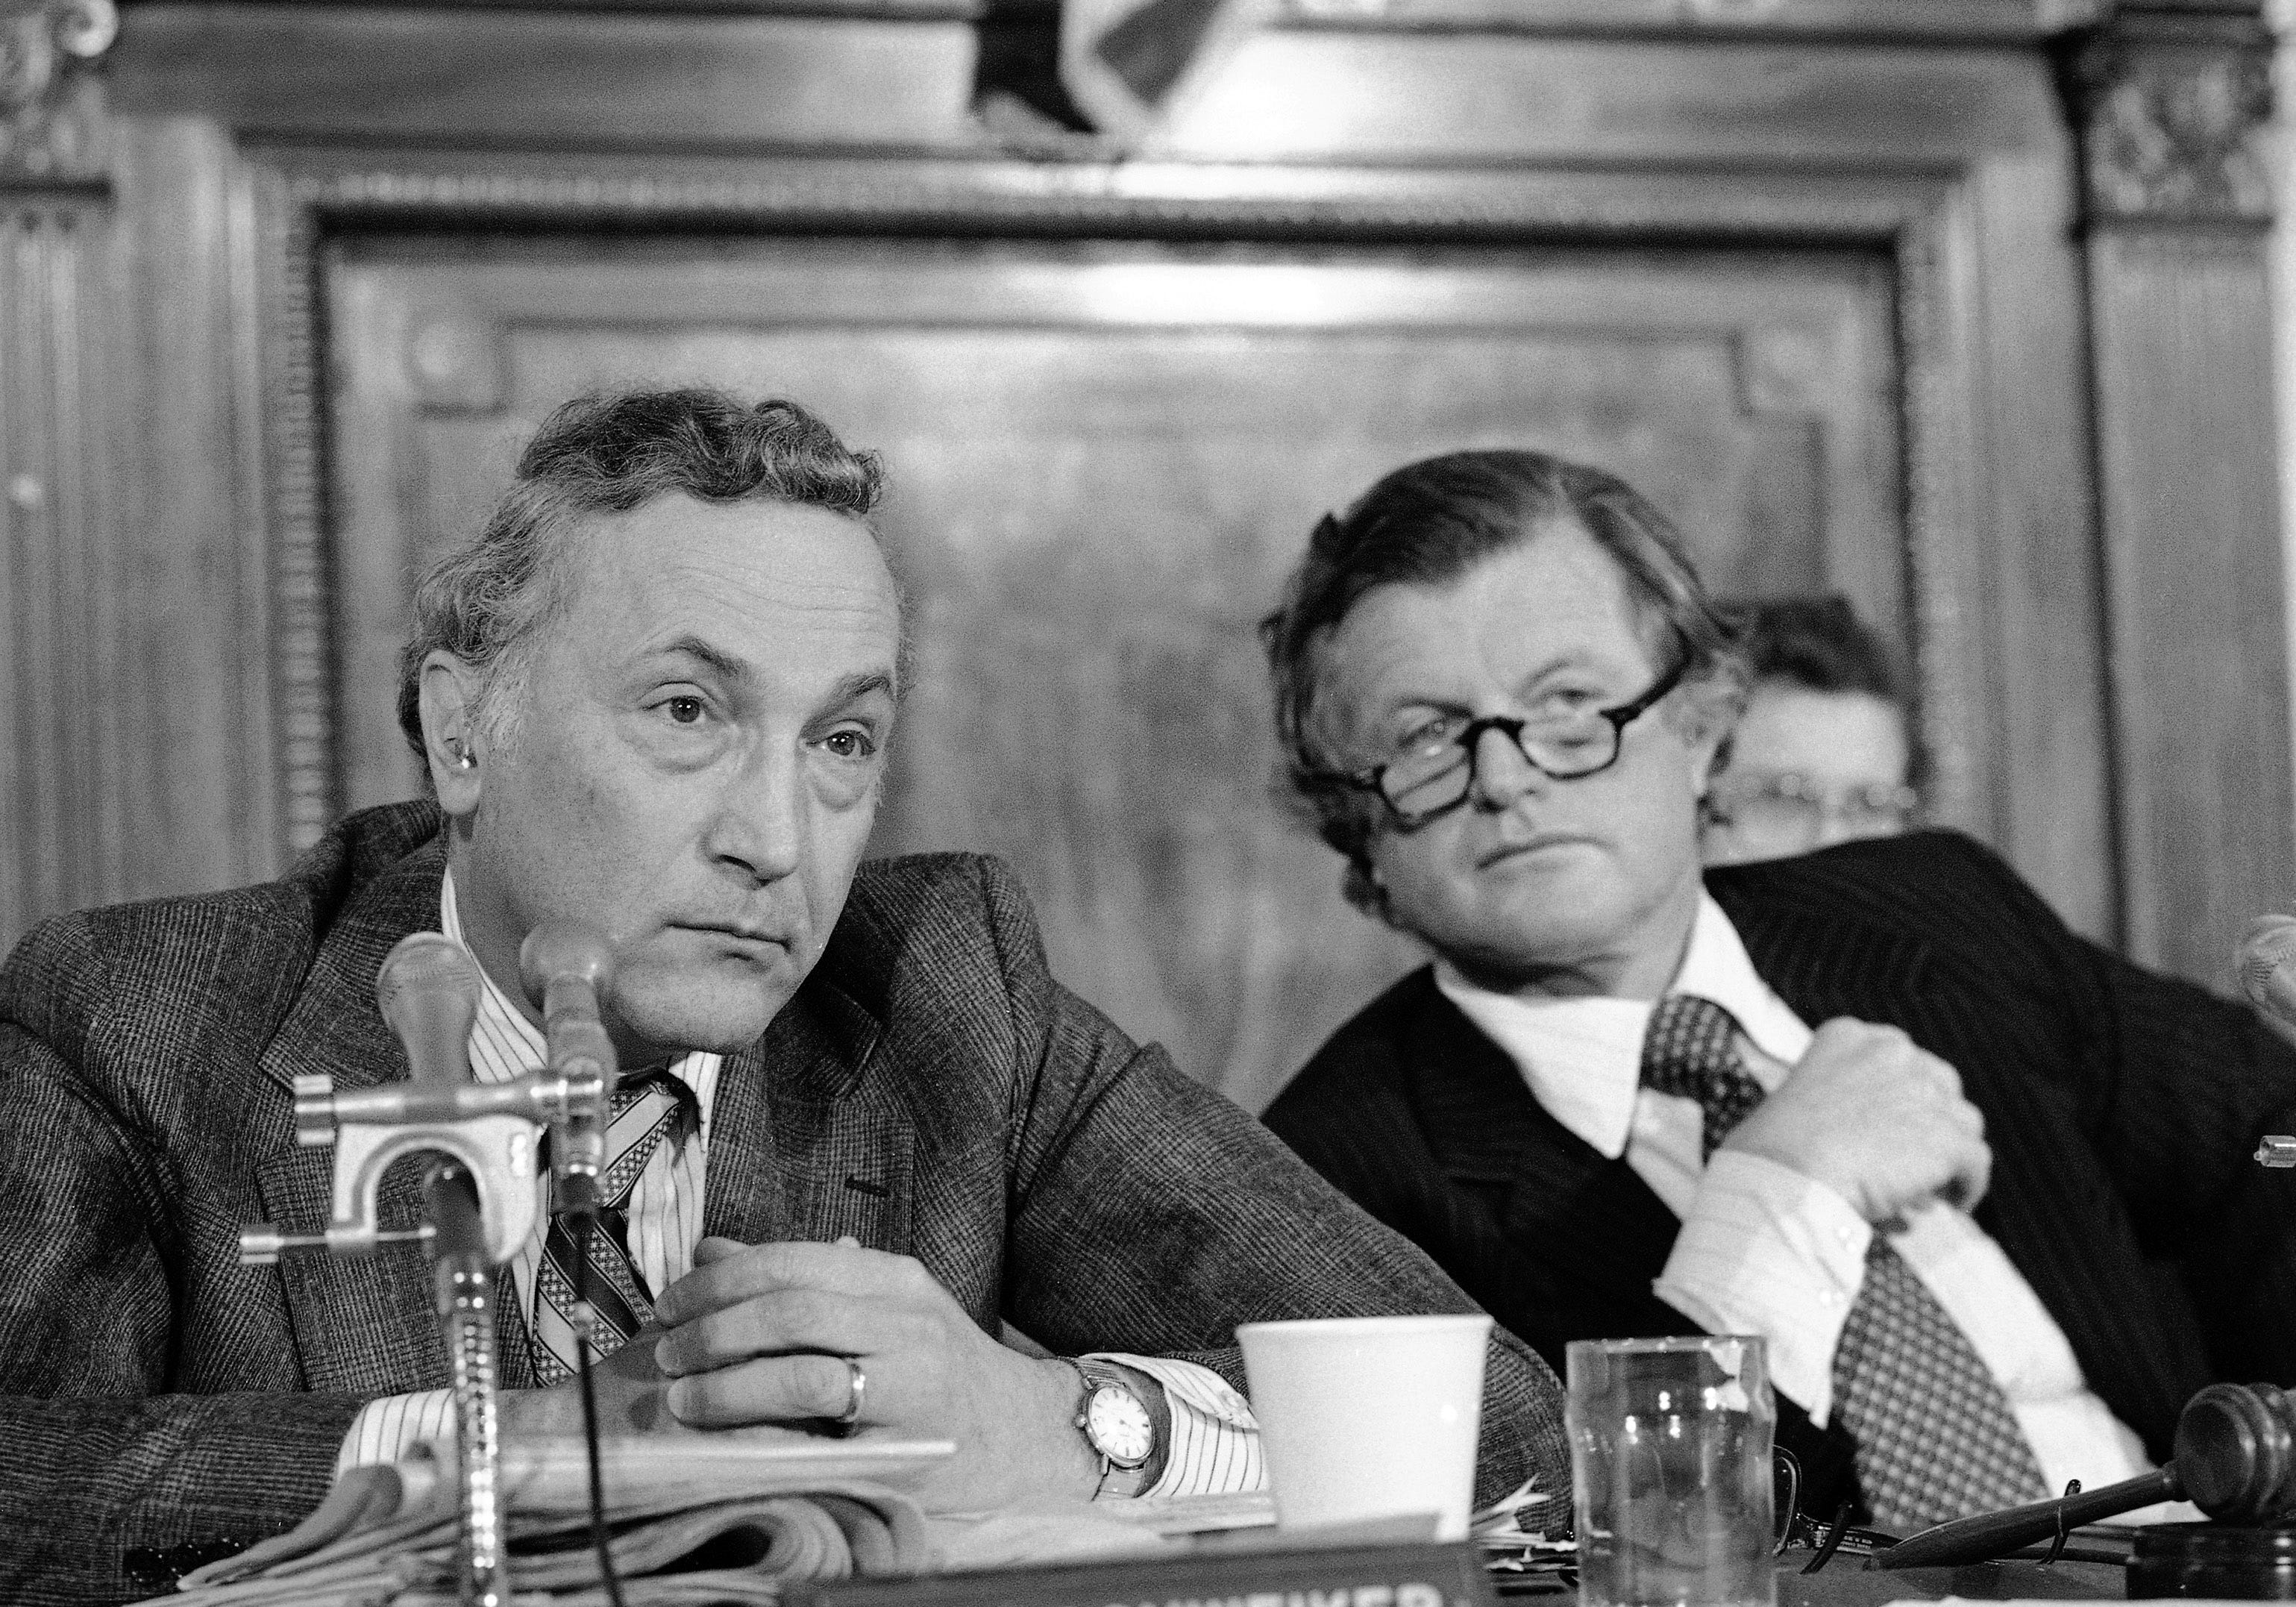 Sen. Richard Schweiker, R-Pa., left, and Edward Kennedy, D-Mass., members of a Senate Health and Scientific Research subcommittee, confer during a meeting of the panel Wednesday, April 4, 1979 in Washington. The group is probing the nuclear accident at Three Mile Island nuclear power plant in Pennsylvania. (AP Photo/Charles Harrity)